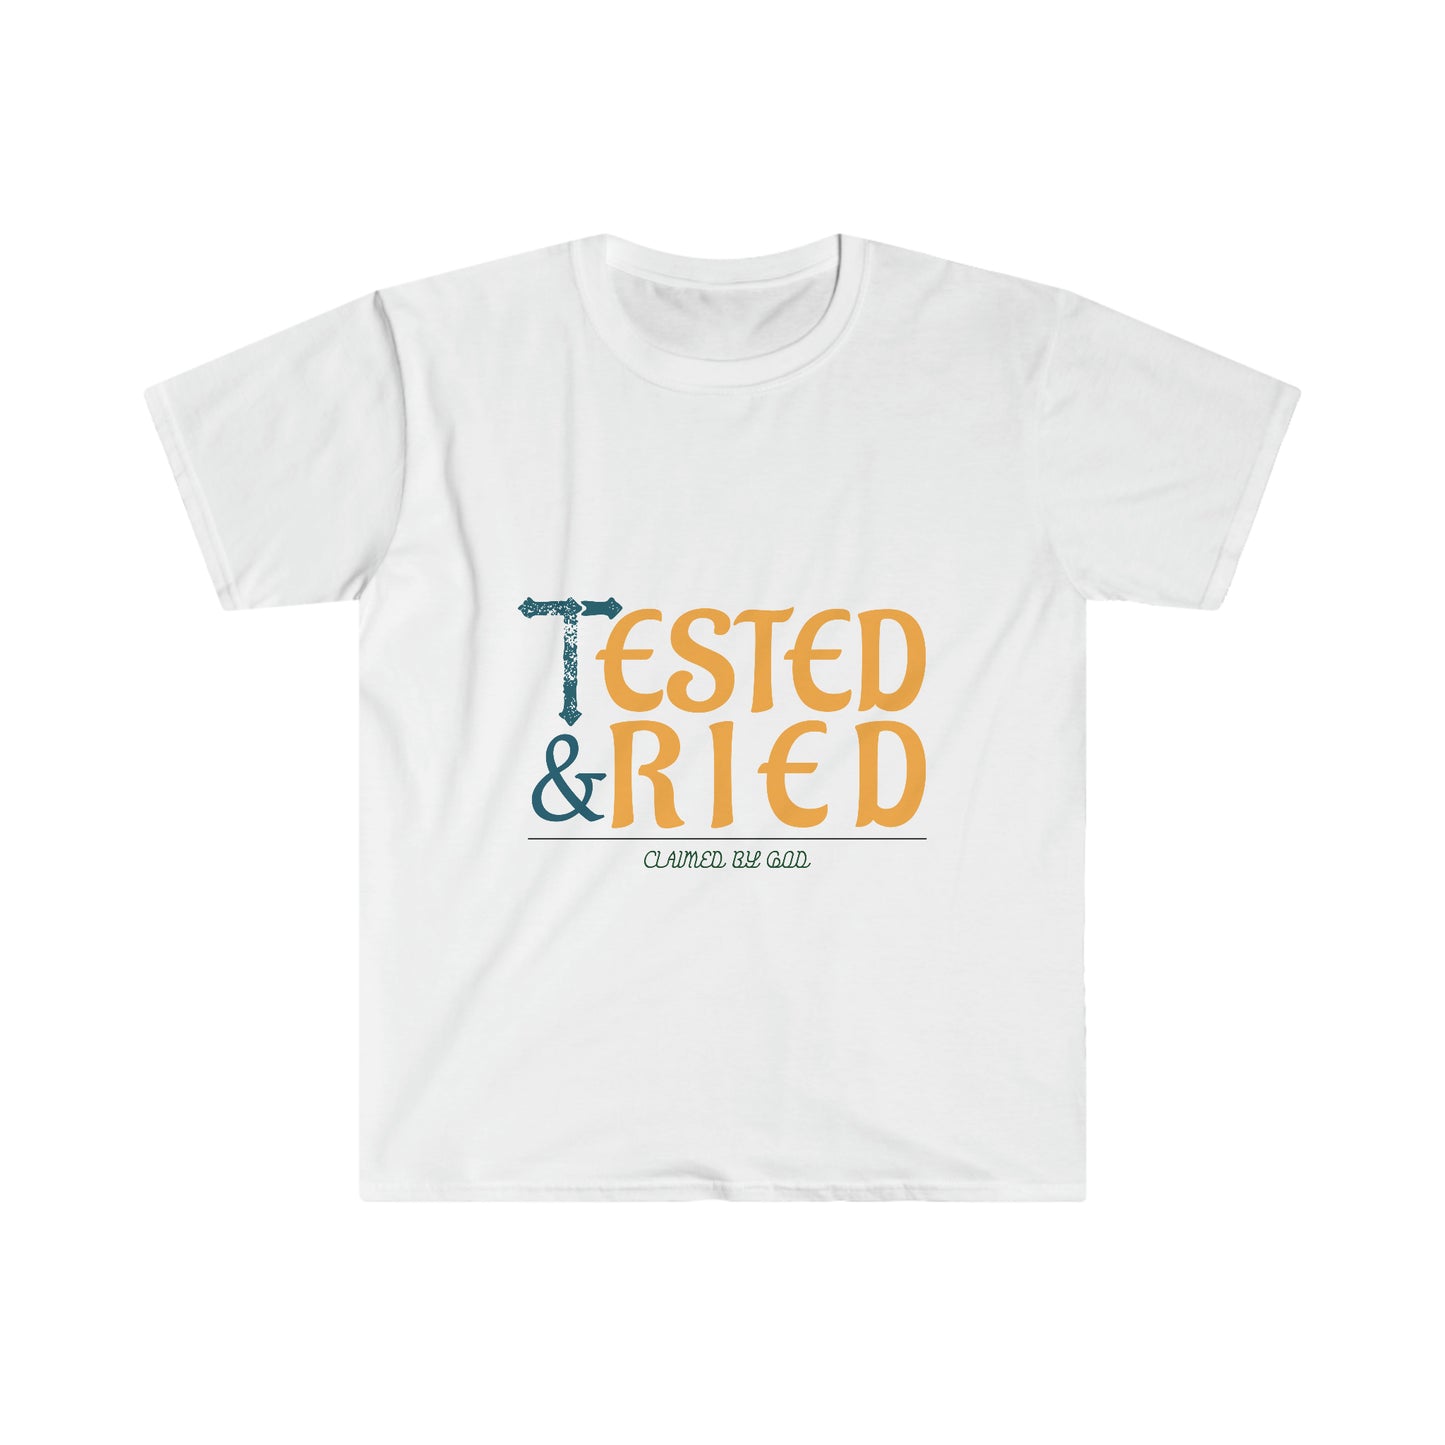 Tested and tried Unisex T-shirt